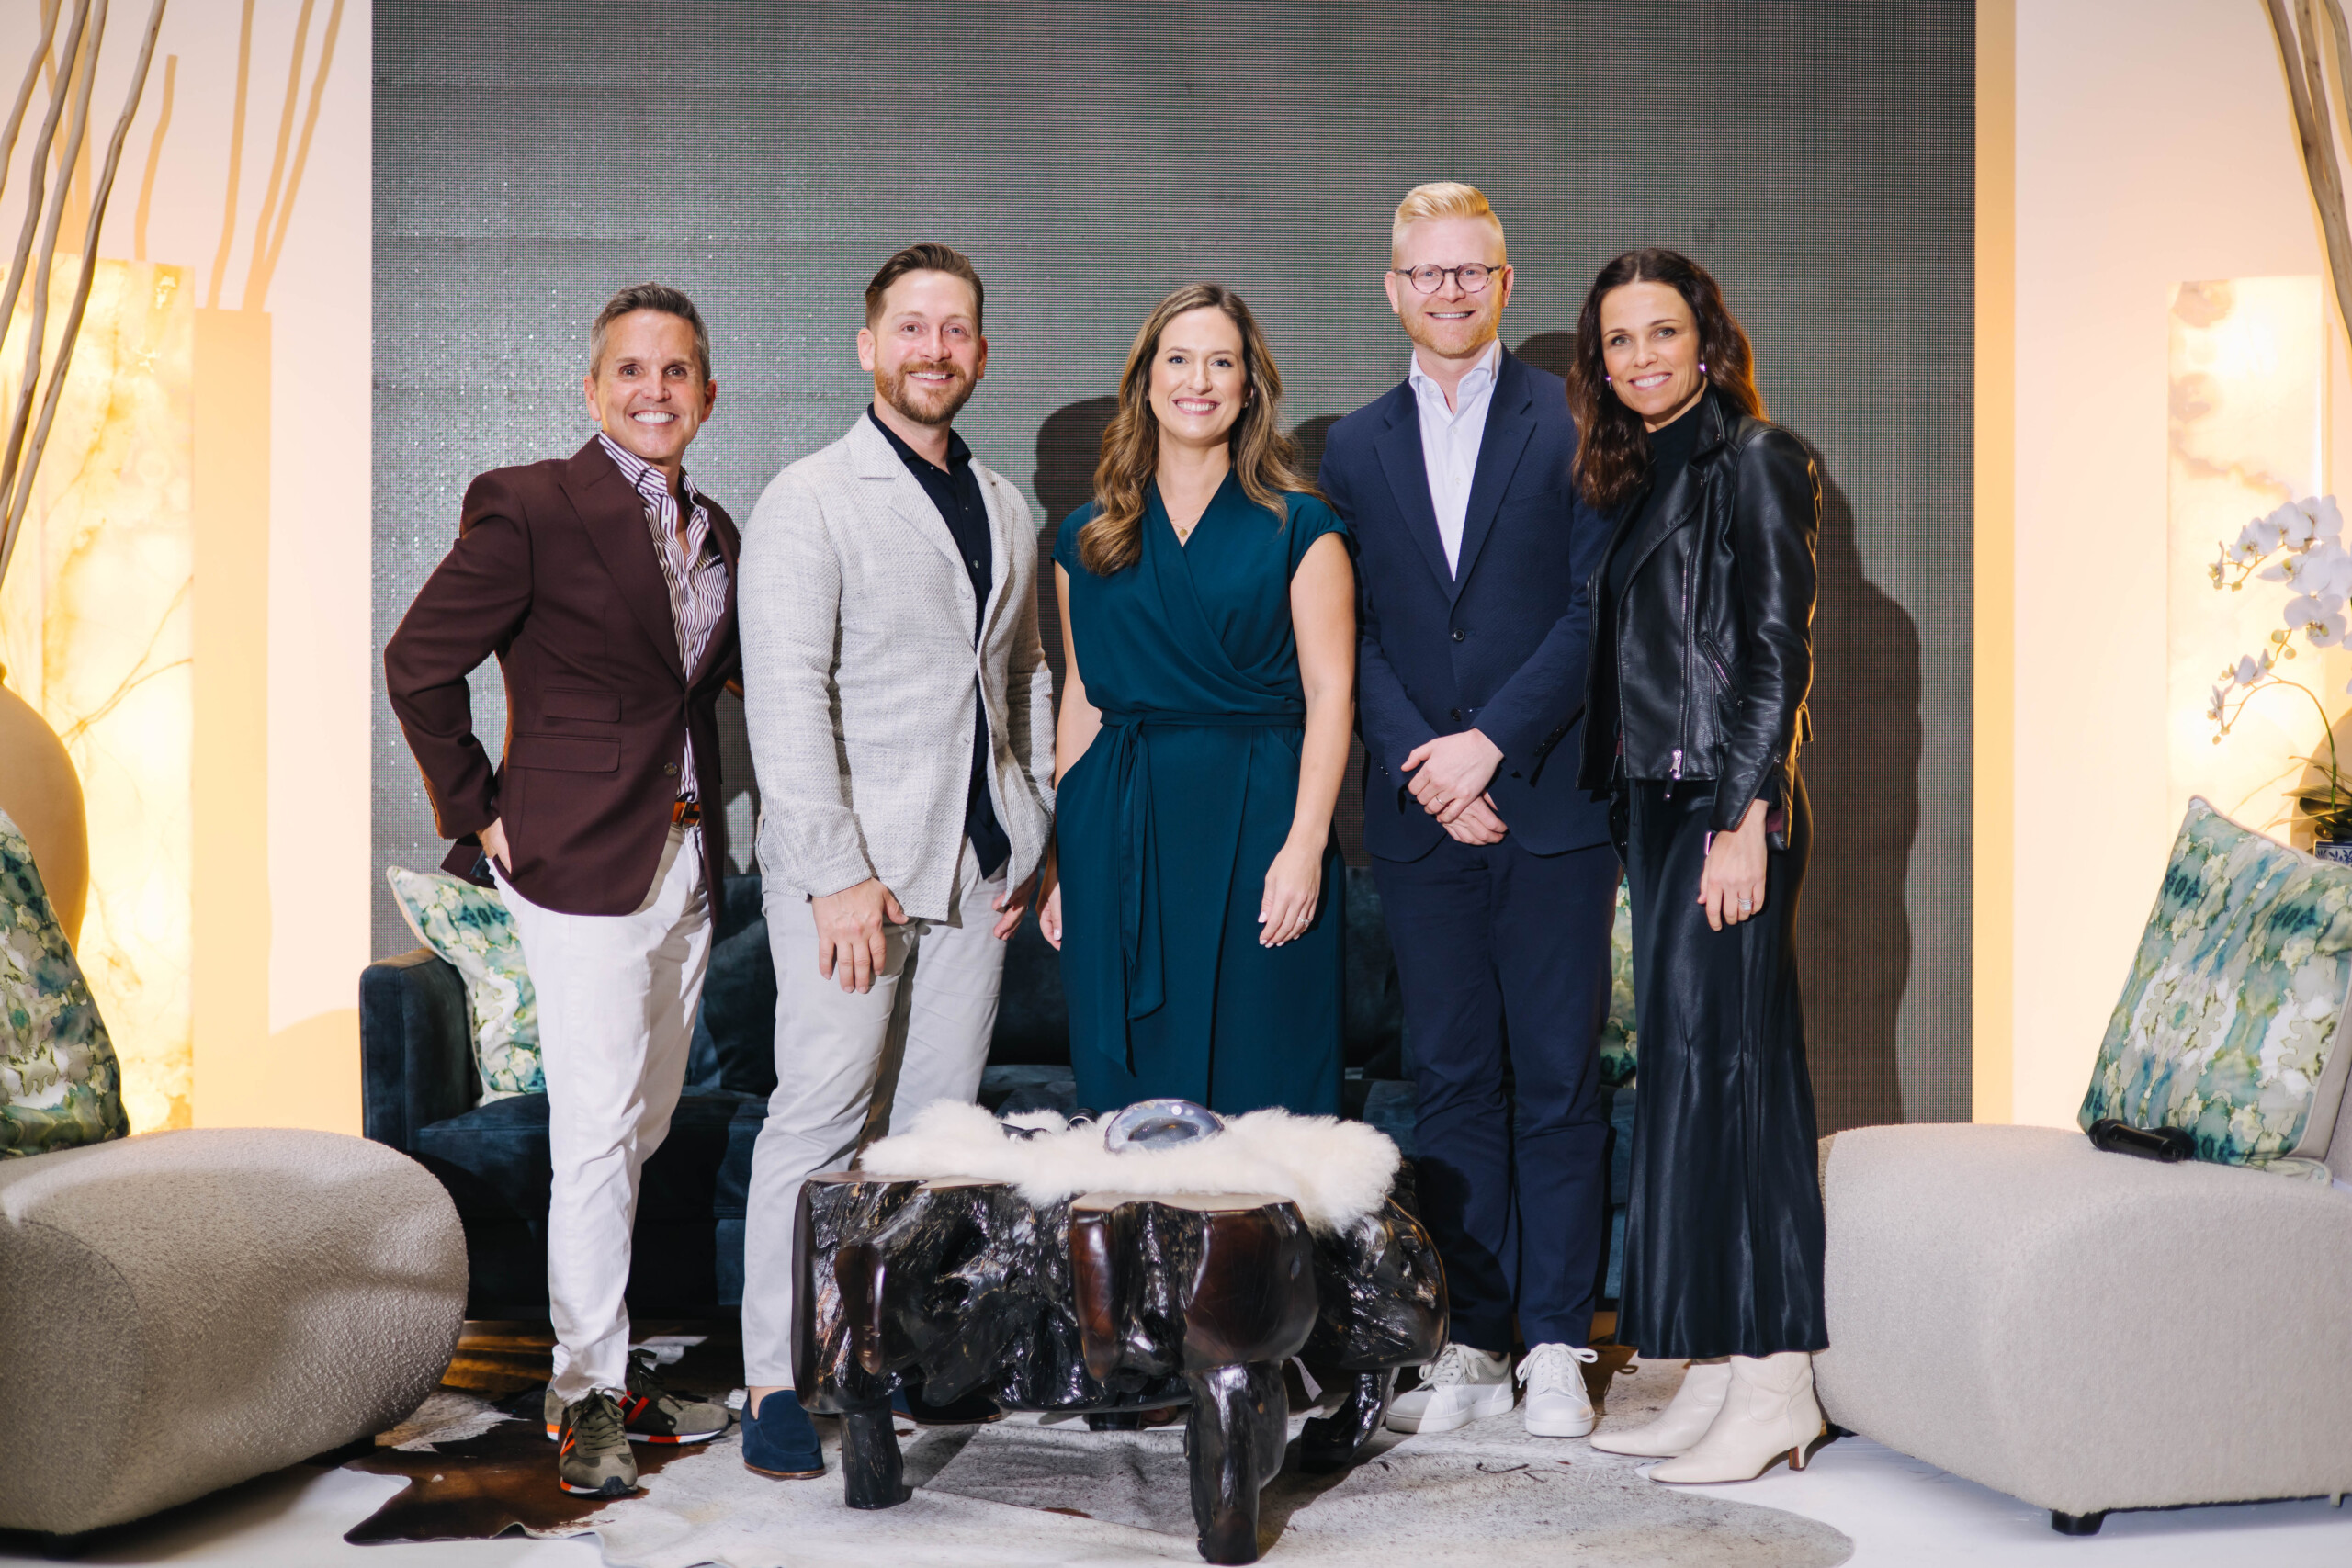 Gallery: Dallas Market Center Presents How to Snag the Cover Page Panel ...